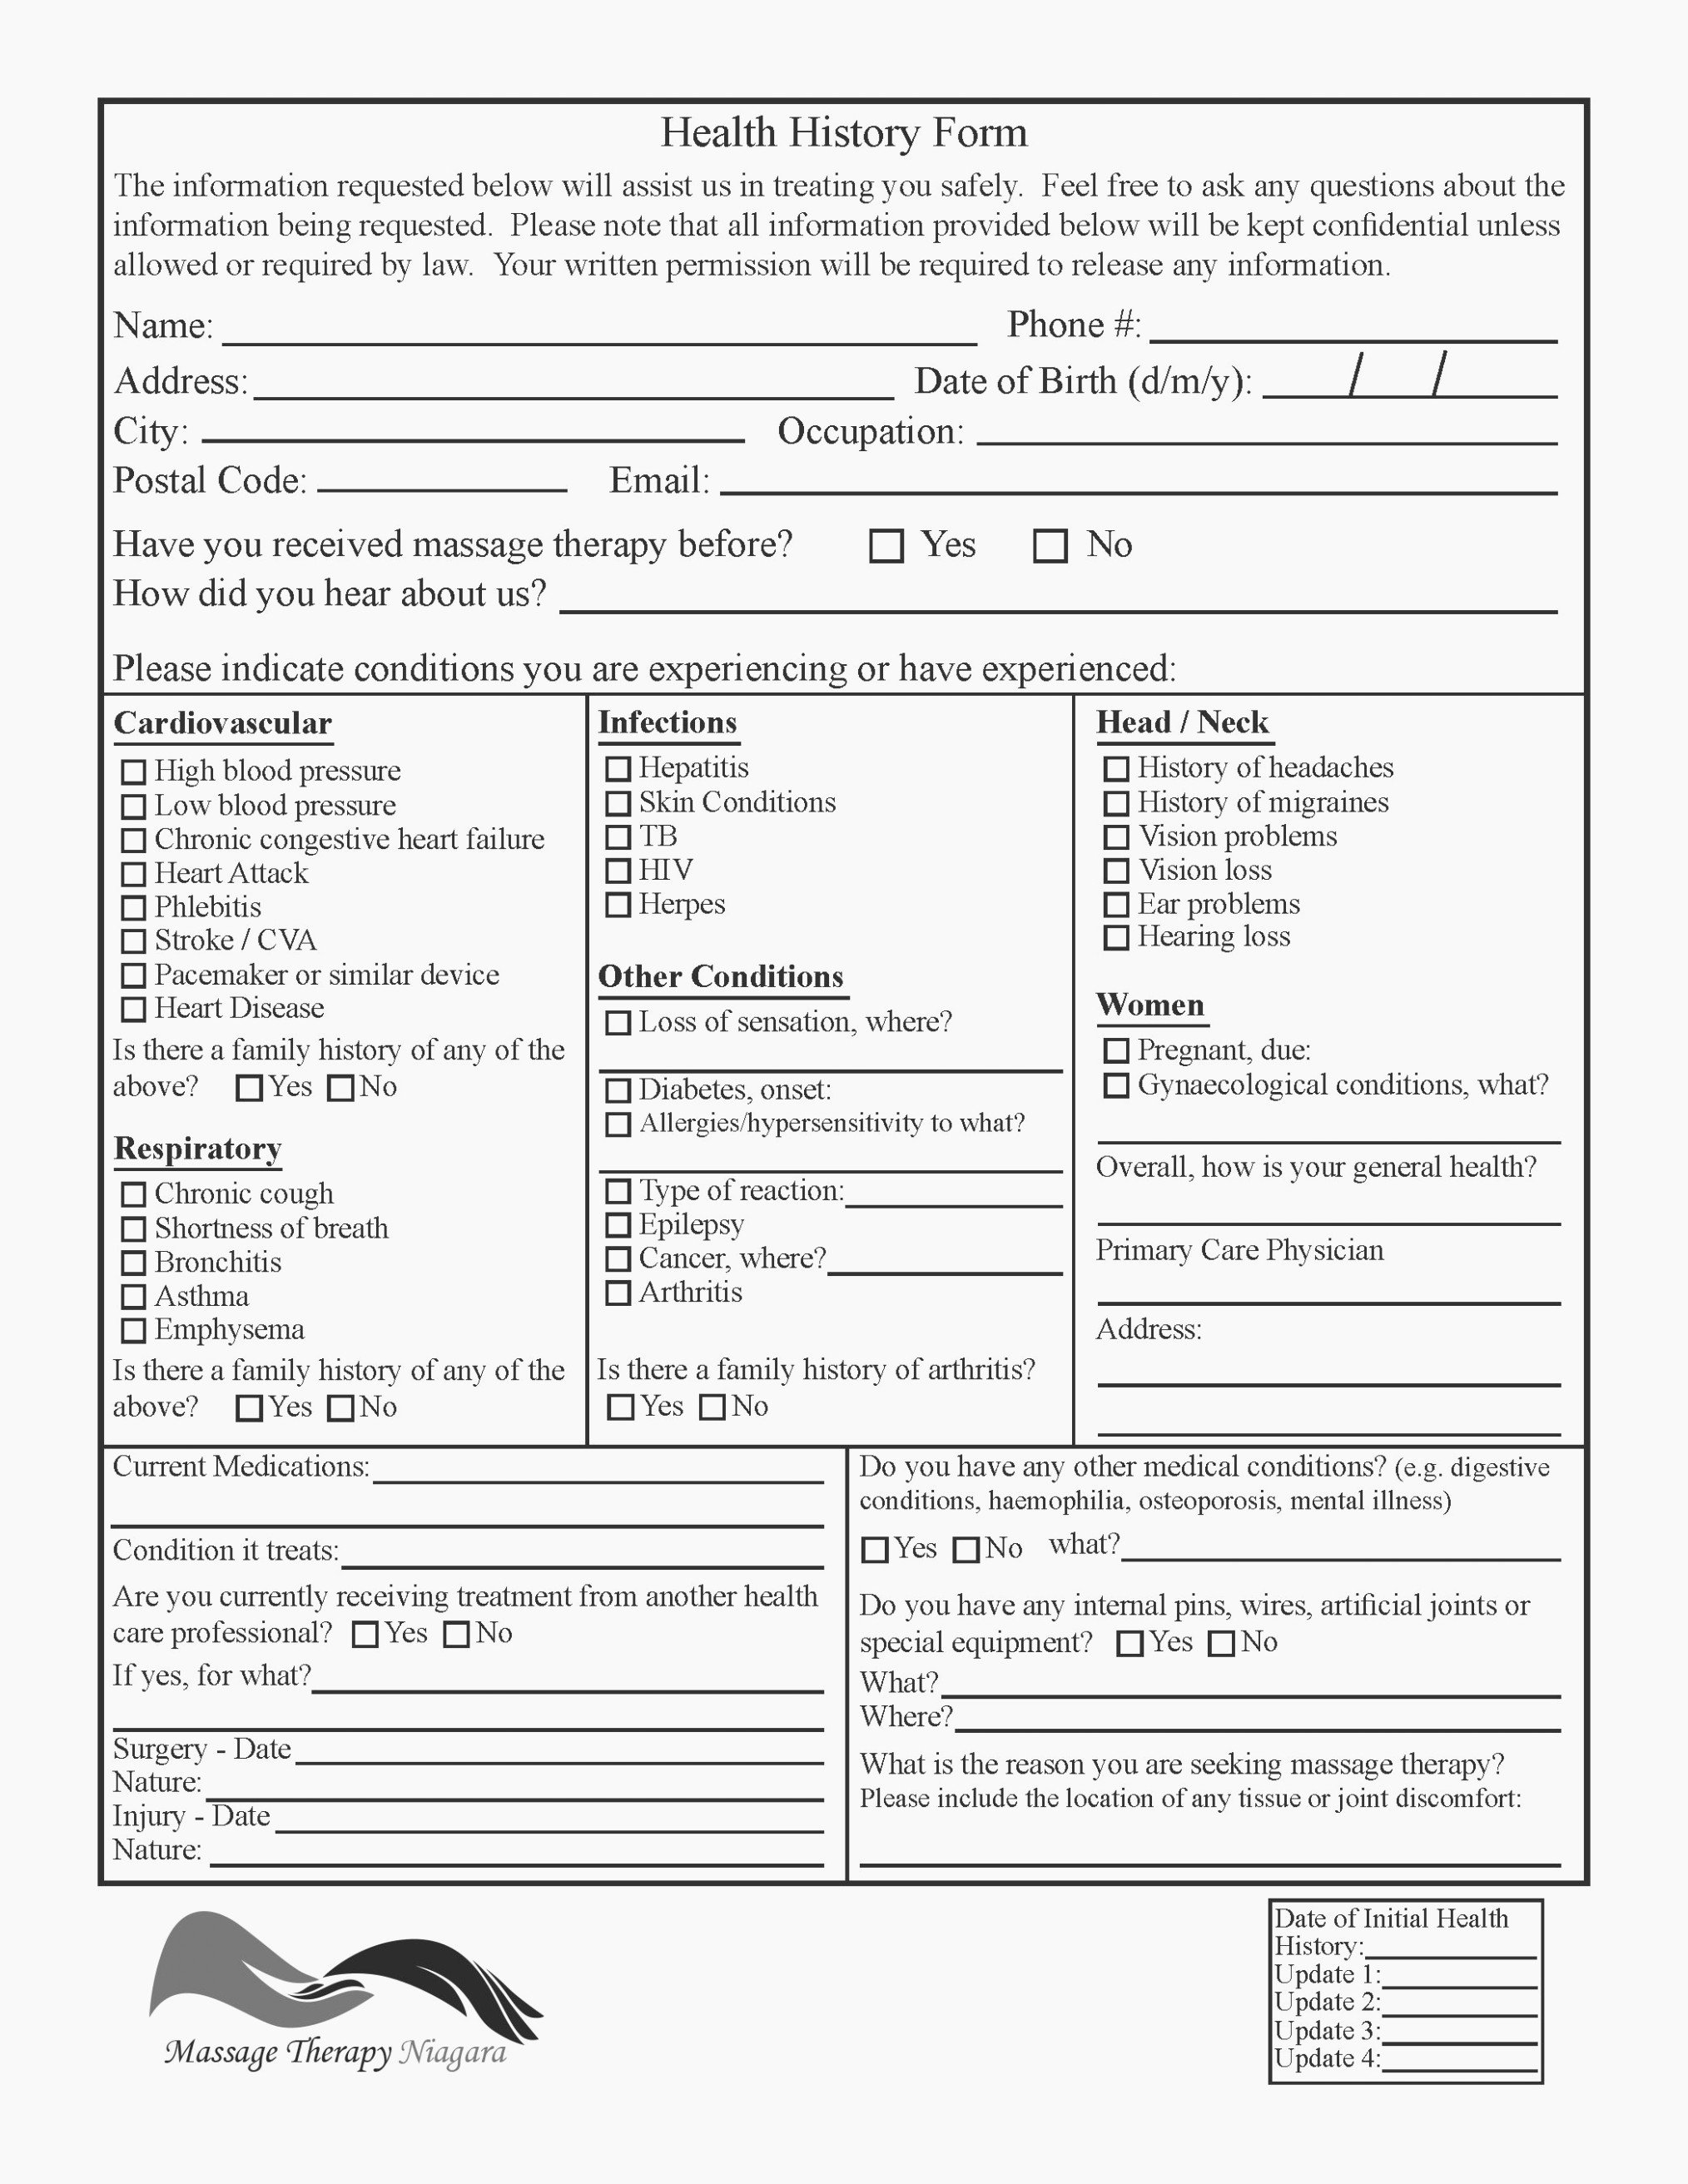 Massage therapy Intake form Template Luxury Five top Risks